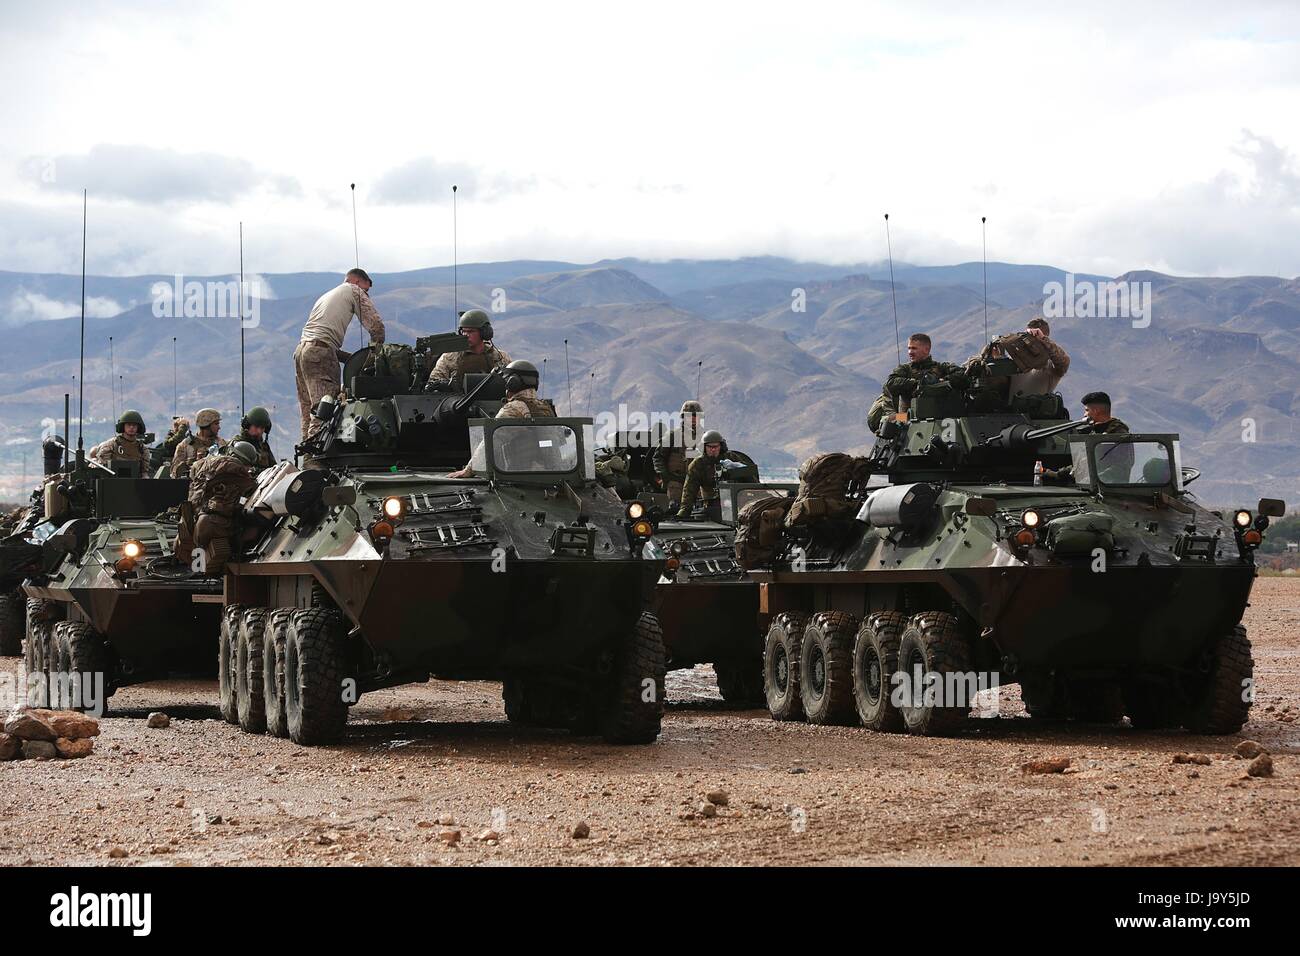 U.S. Marine soldiers in light armored vehicles arrive at the Alvarez de Sotomayor military base during exercise Trident Juncture October 26, 2015 in Almeria, Spain.    (photo by Chad McMeen /US Marines via Planetpix) Stock Photo